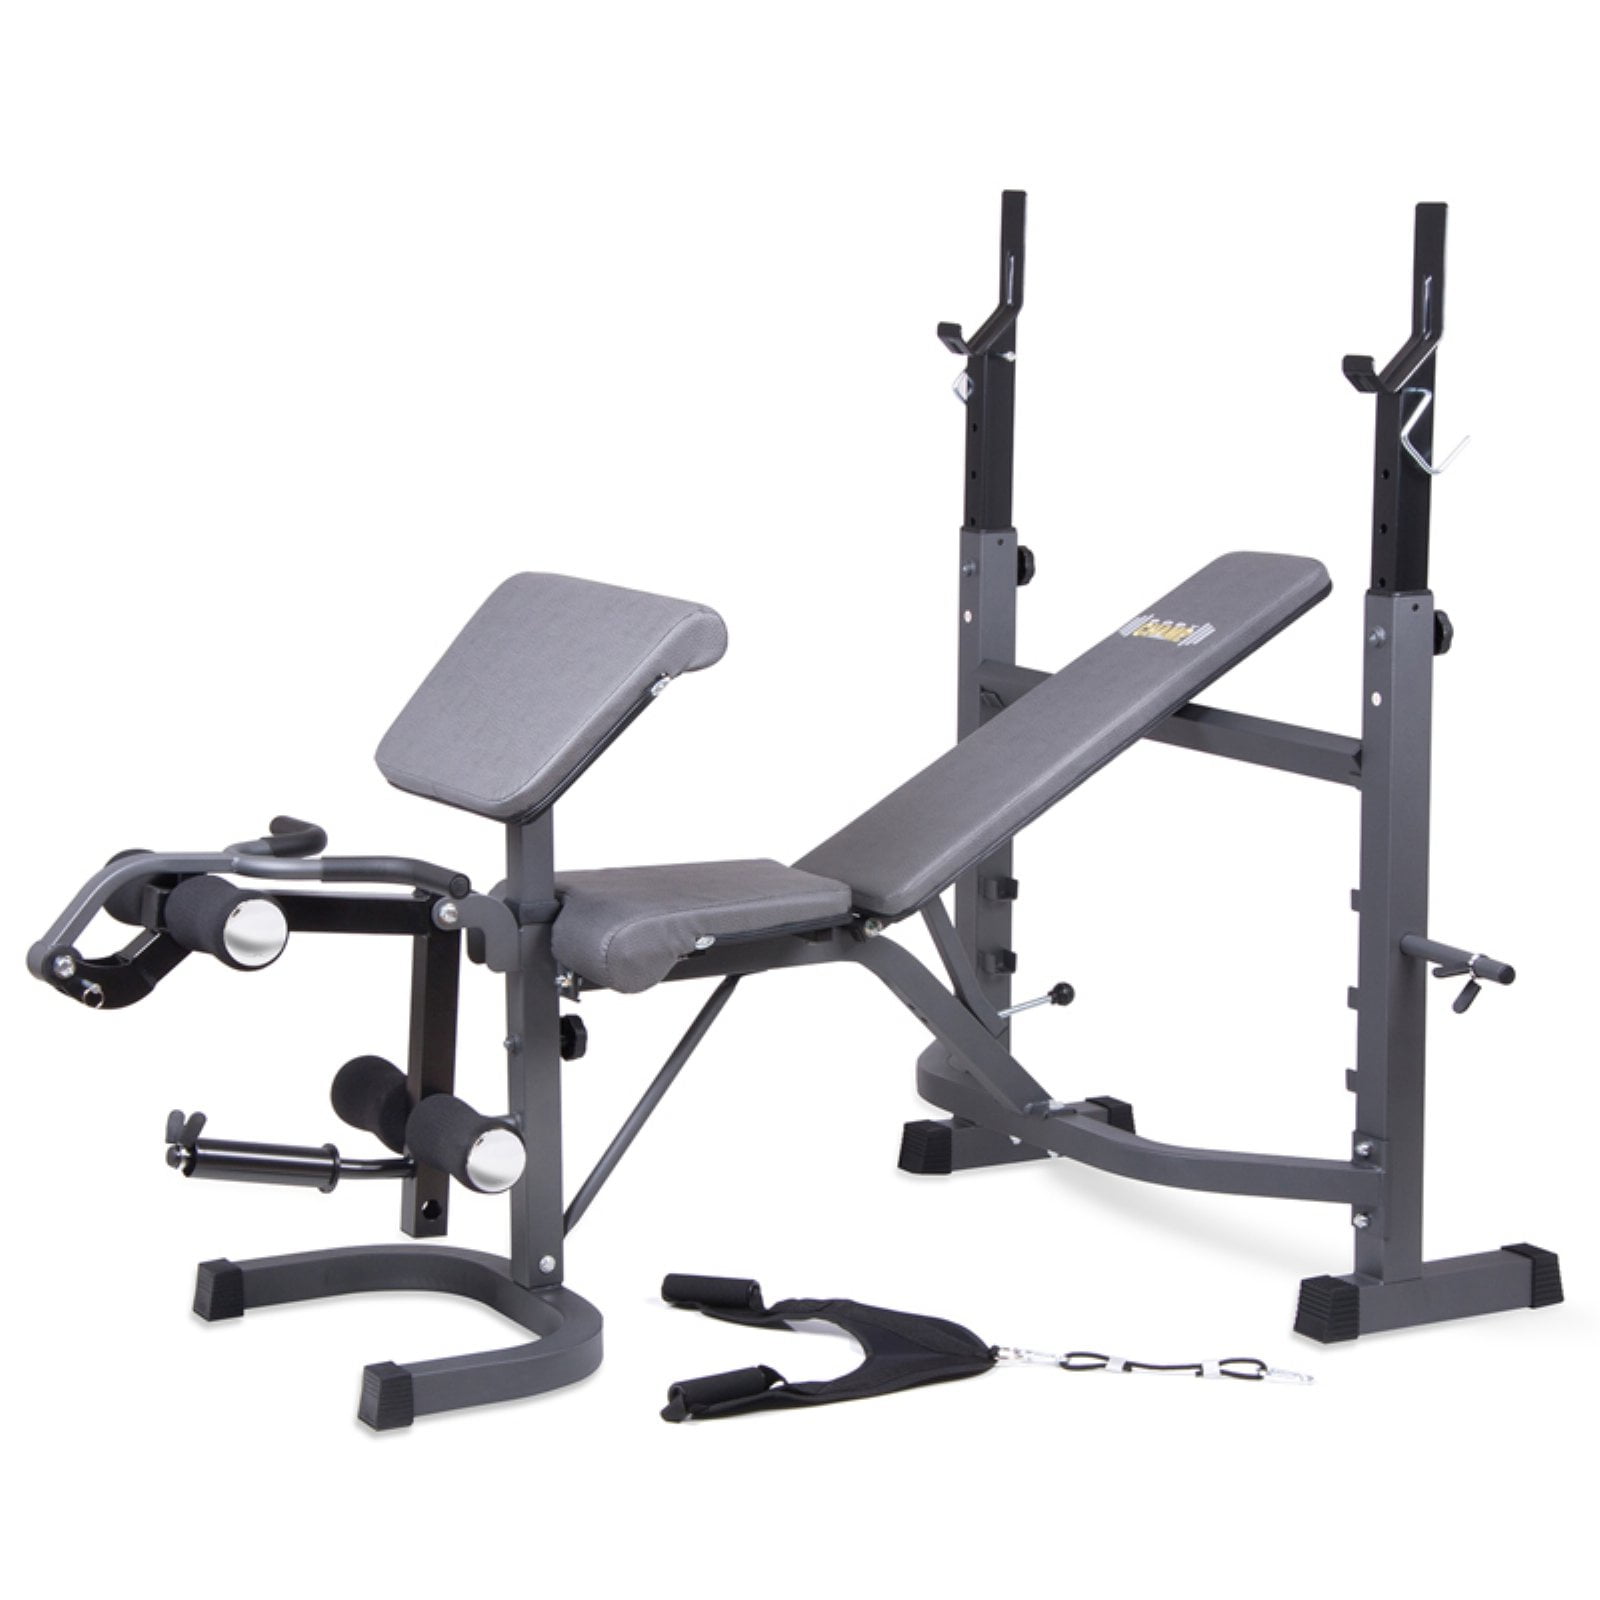 Details about   Dumbbell Bench Weightlifting With Preacher Curl Leg Developer and Crunch Stand 